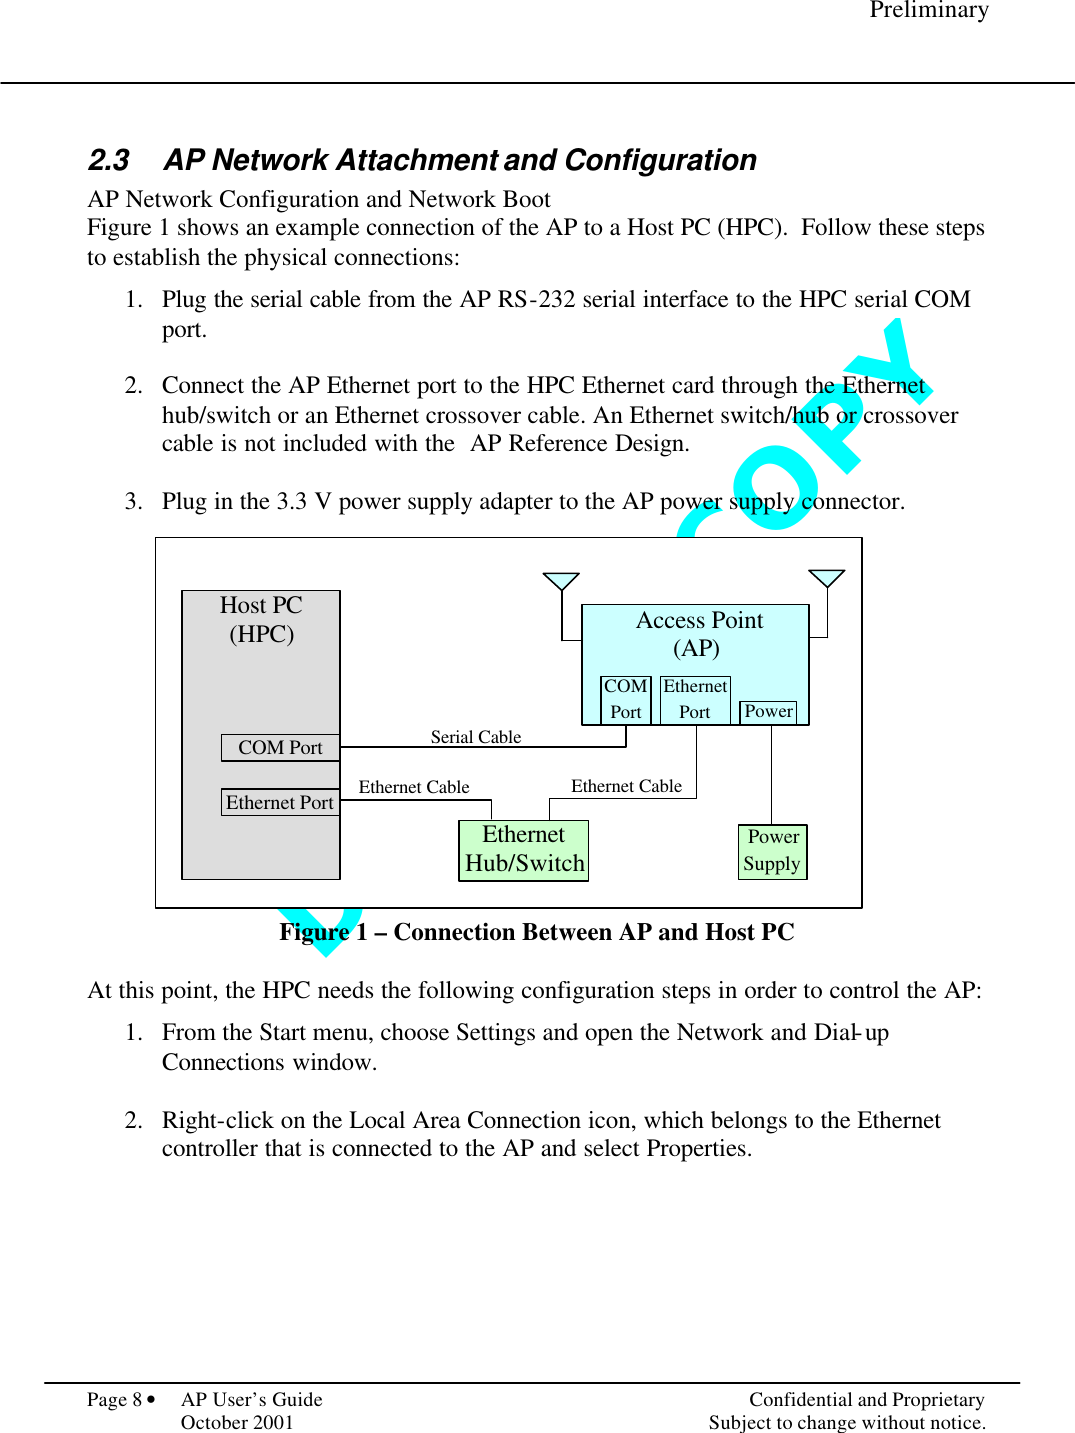 D O   N O T   C O P Y      Preliminary  Page 8 • AP User’s Guide    Confidential and Proprietary   October 2001    Subject to change without notice.  2.3 AP Network Attachment and Configuration AP Network Configuration and Network Boot Figure 1 shows an example connection of the AP to a Host PC (HPC).  Follow these steps to establish the physical connections:  1.  Plug the serial cable from the AP RS-232 serial interface to the HPC serial COM port.  2.  Connect the AP Ethernet port to the HPC Ethernet card through the Ethernet hub/switch or an Ethernet crossover cable. An Ethernet switch/hub or crossover cable is not included with the  AP Reference Design.  3.  Plug in the 3.3 V power supply adapter to the AP power supply connector.                Figure 1 – Connection Between AP and Host PC  At this point, the HPC needs the following configuration steps in order to control the AP:    1.  From the Start menu, choose Settings and open the Network and Dial-up Connections window.  2.  Right-click on the Local Area Connection icon, which belongs to the Ethernet controller that is connected to the AP and select Properties.  Host PC (HPC)  Ethernet Port Serial Cable Ethernet Cable  Access Point (AP)  Ethernet Hub/Switch COM Port COM Port Ethernet Port Power Power Supply Ethernet Cable 